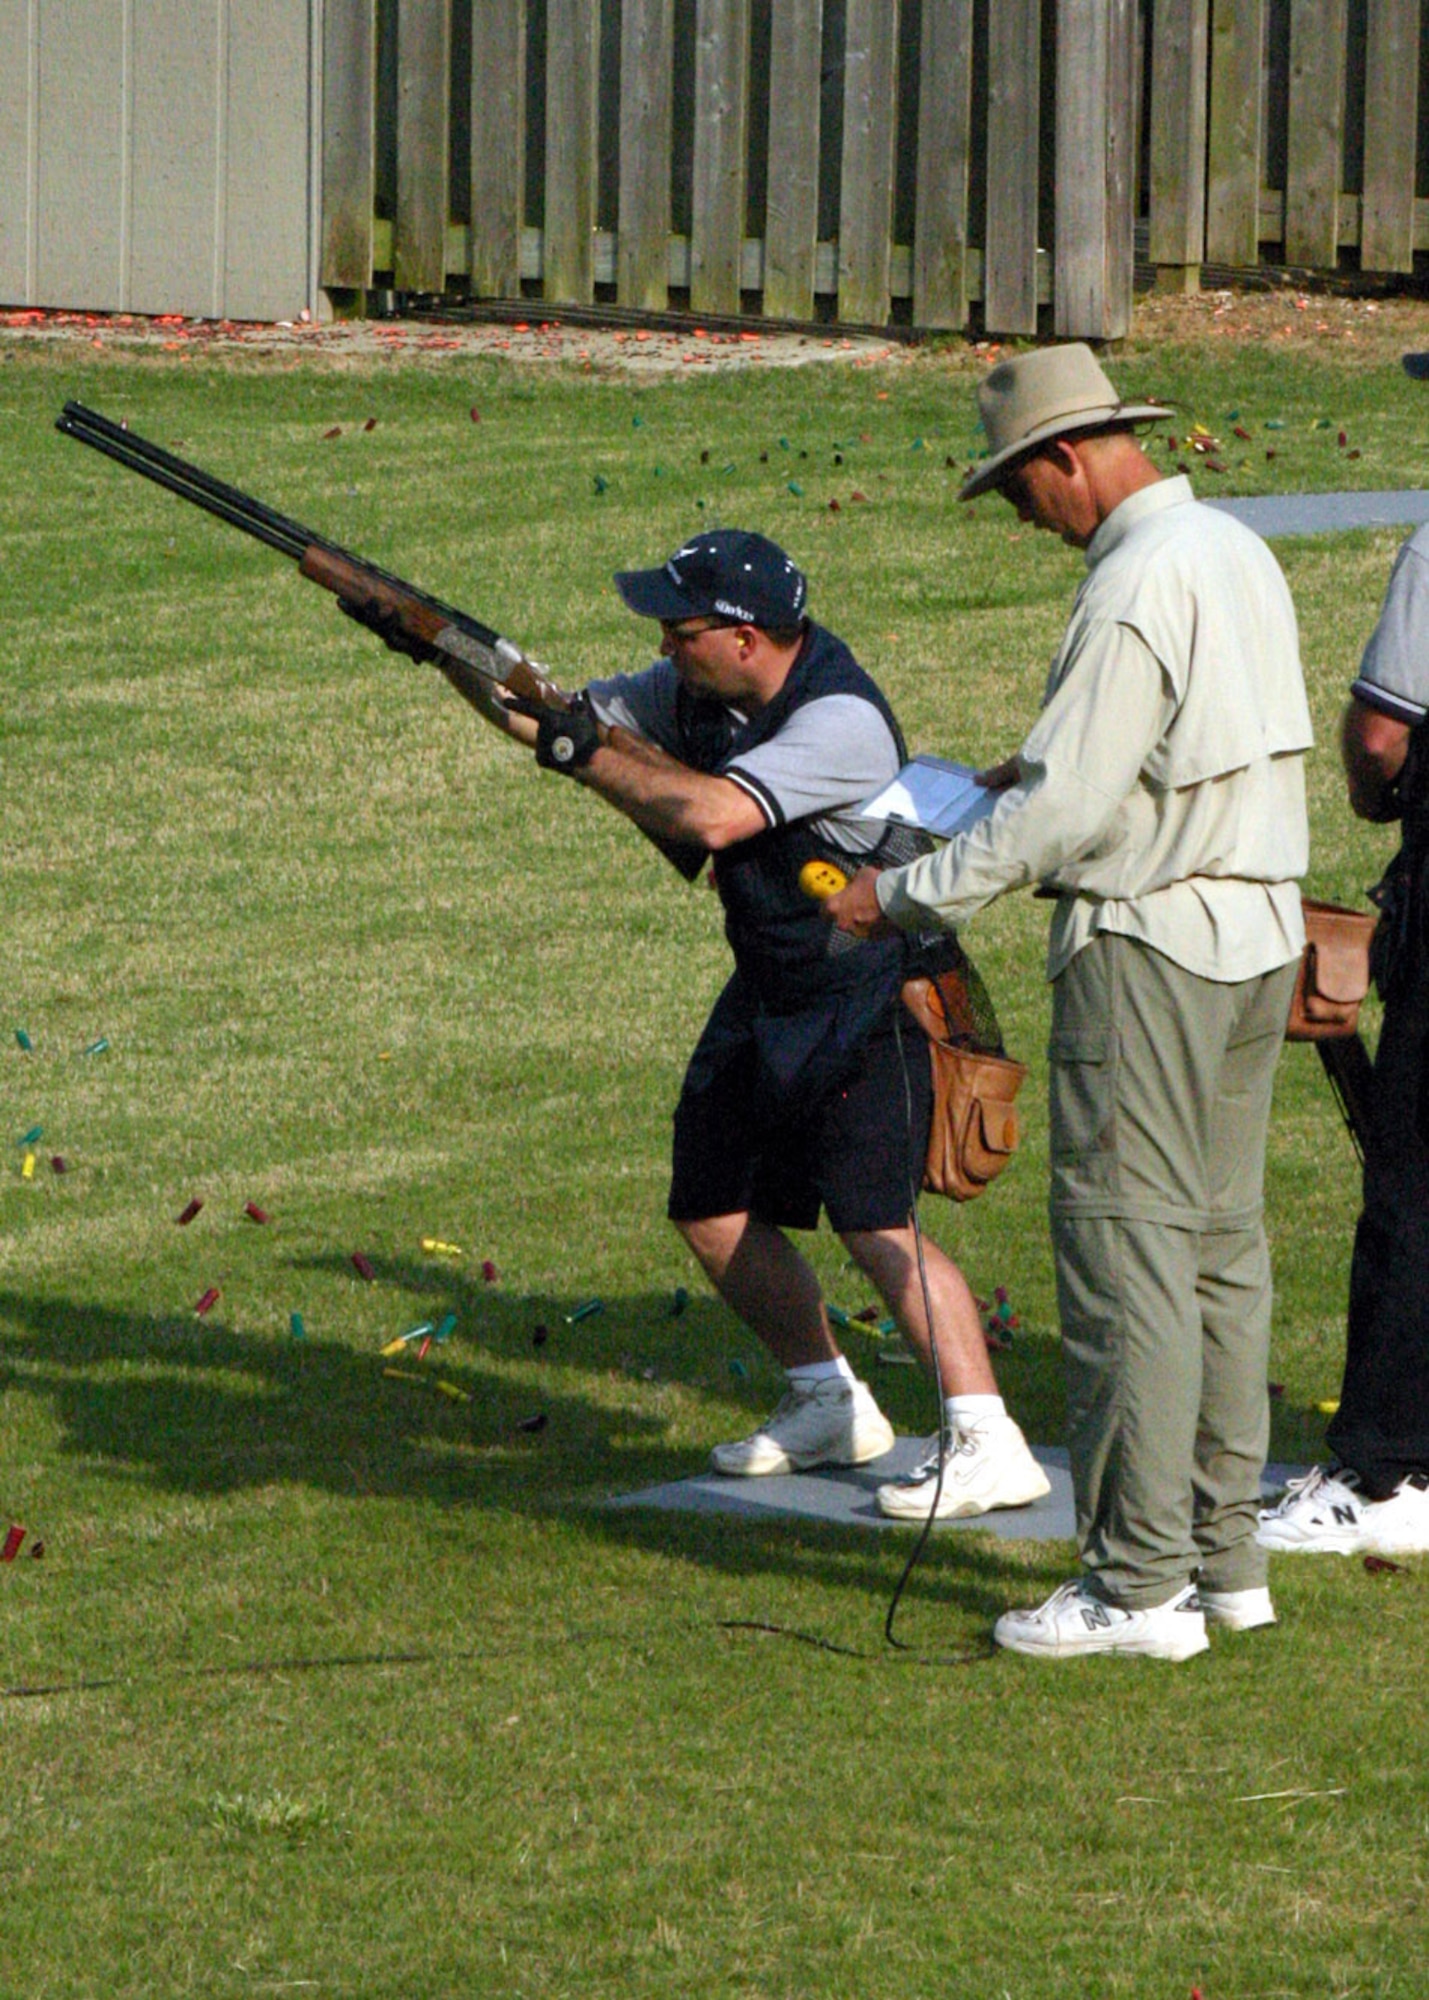 Master Sgt. John Barnes takes aim during the Armed Services Skeet Championship in May 2005. The Malmstrom Air Force Base, Mont., Airman was the 2005 Armed Forces Skeet Associations Hall of Fame Inductee. His team placed first overall.